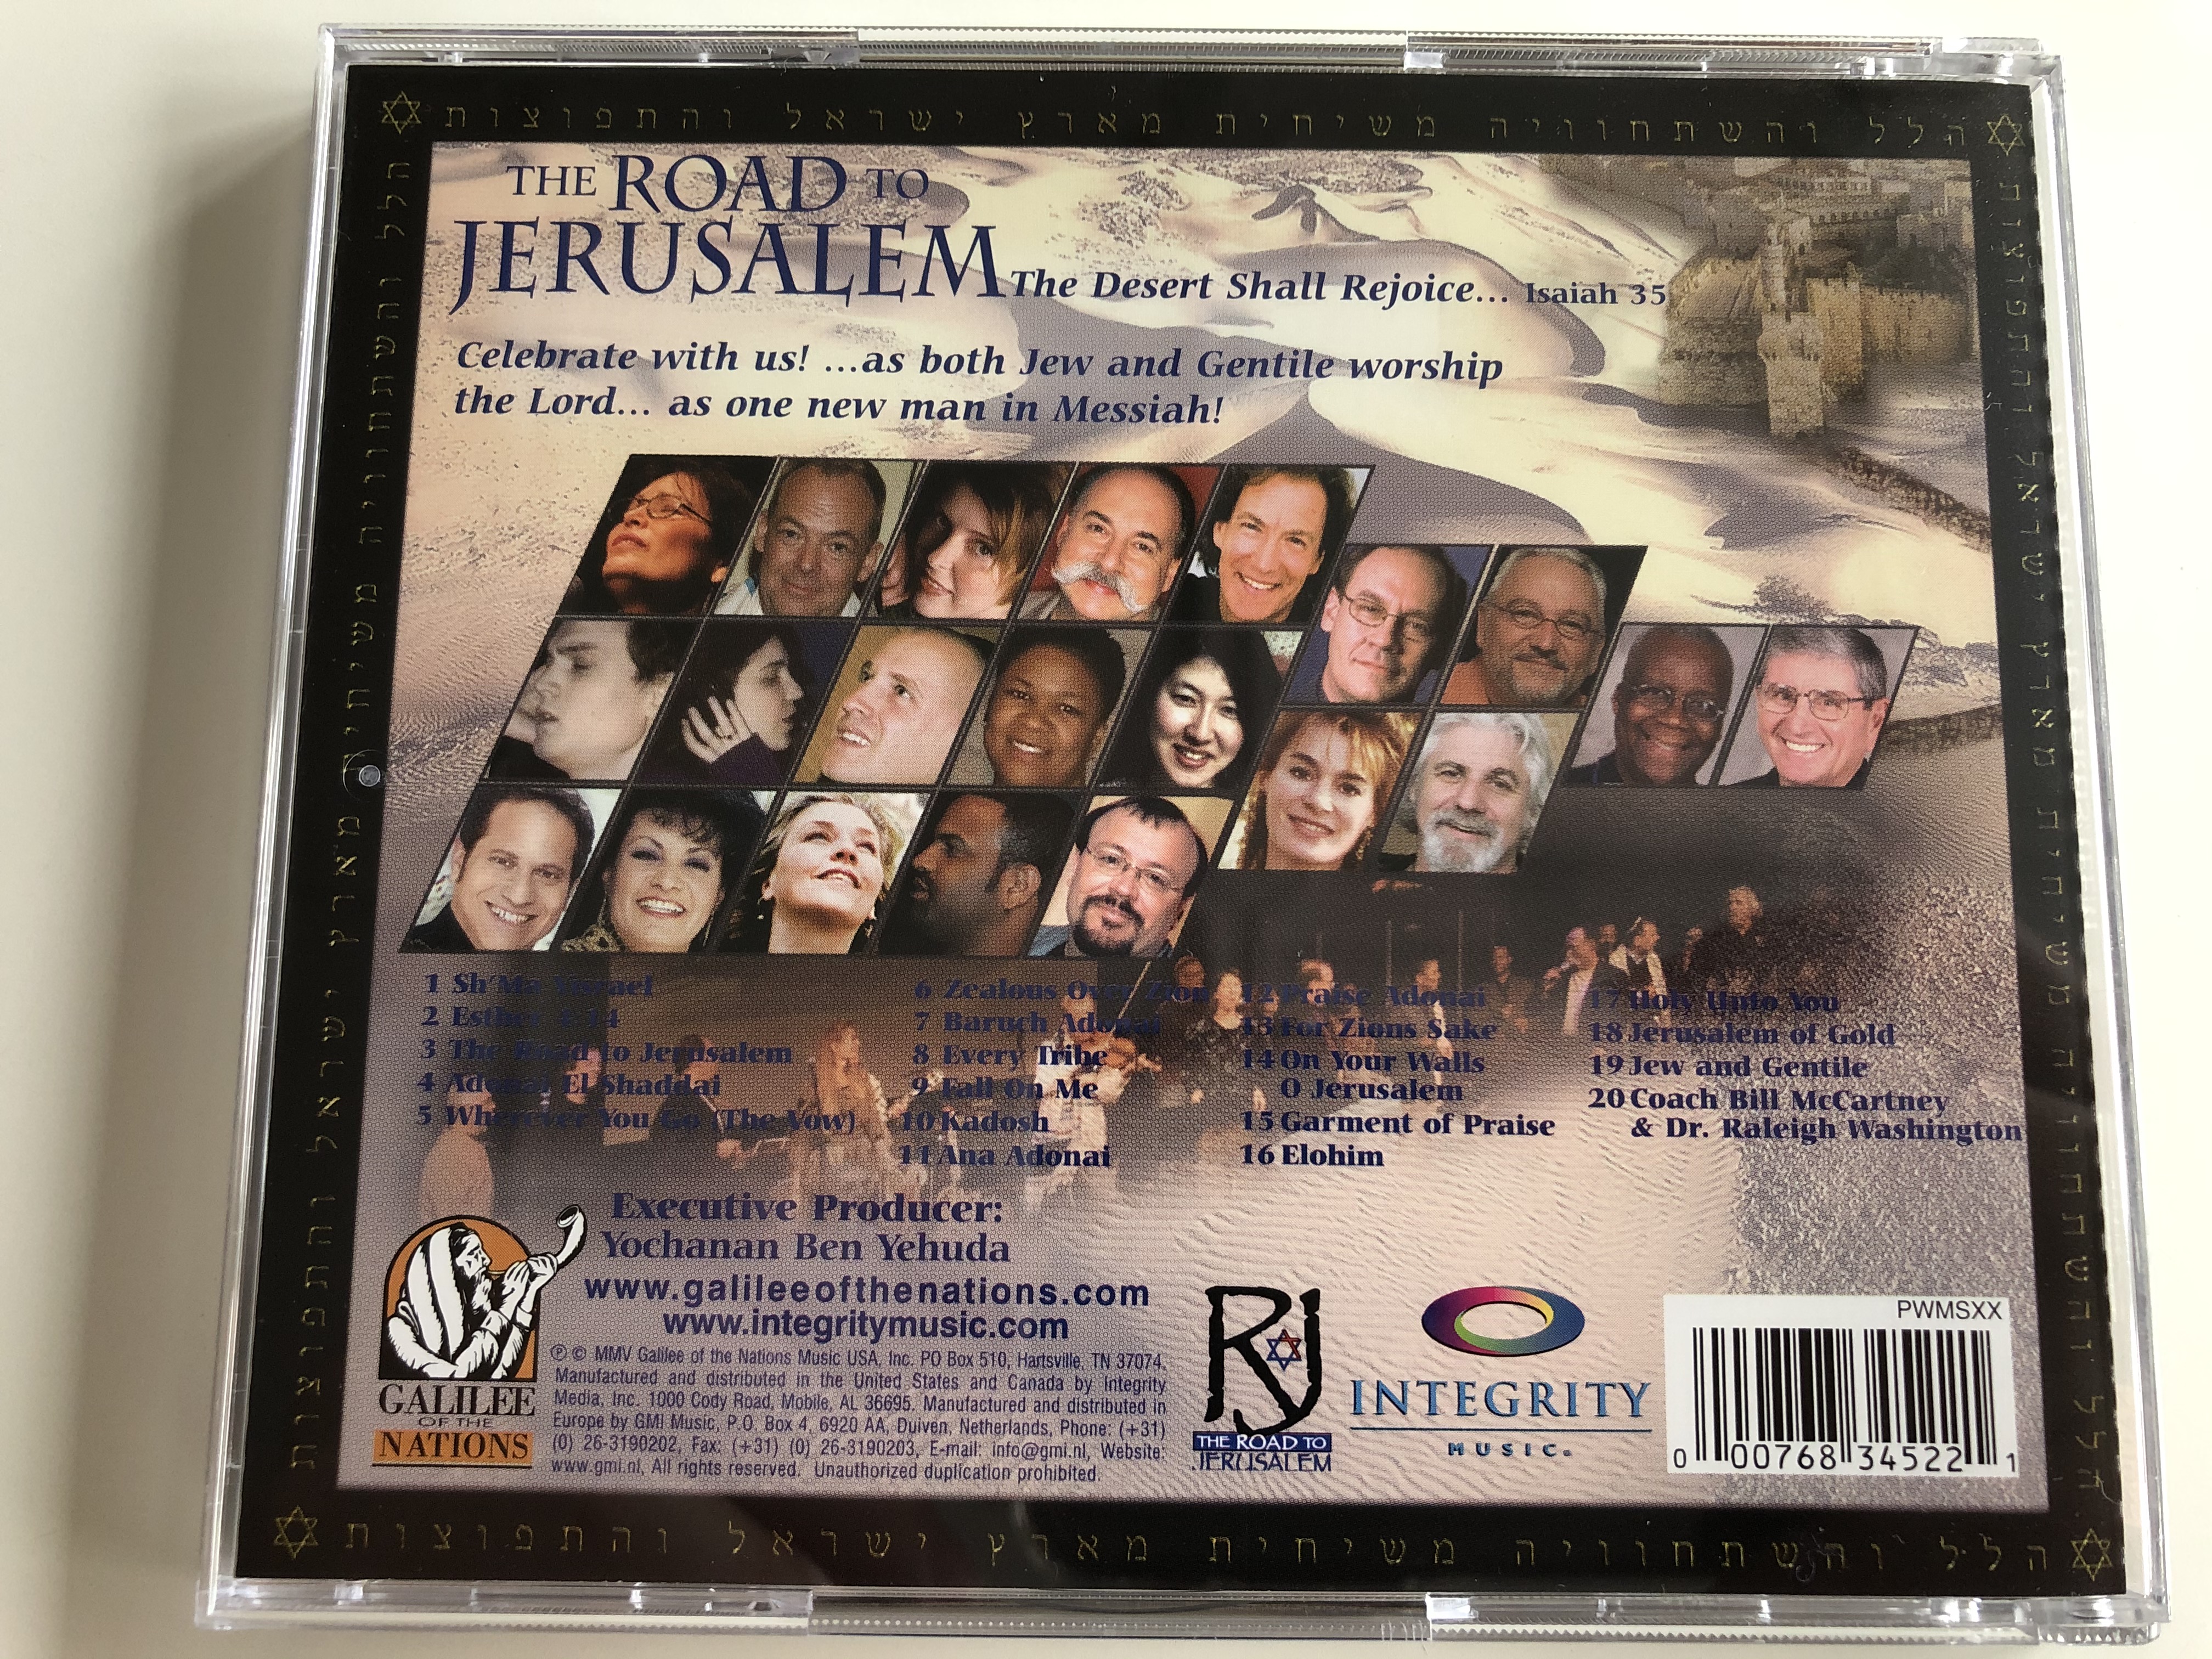 the-road-to-jerusalem-for-such-a-time-as-this-esther-414-mmv-galilee-of-the-nations-audio-cd-pwmsxx-10-.jpg